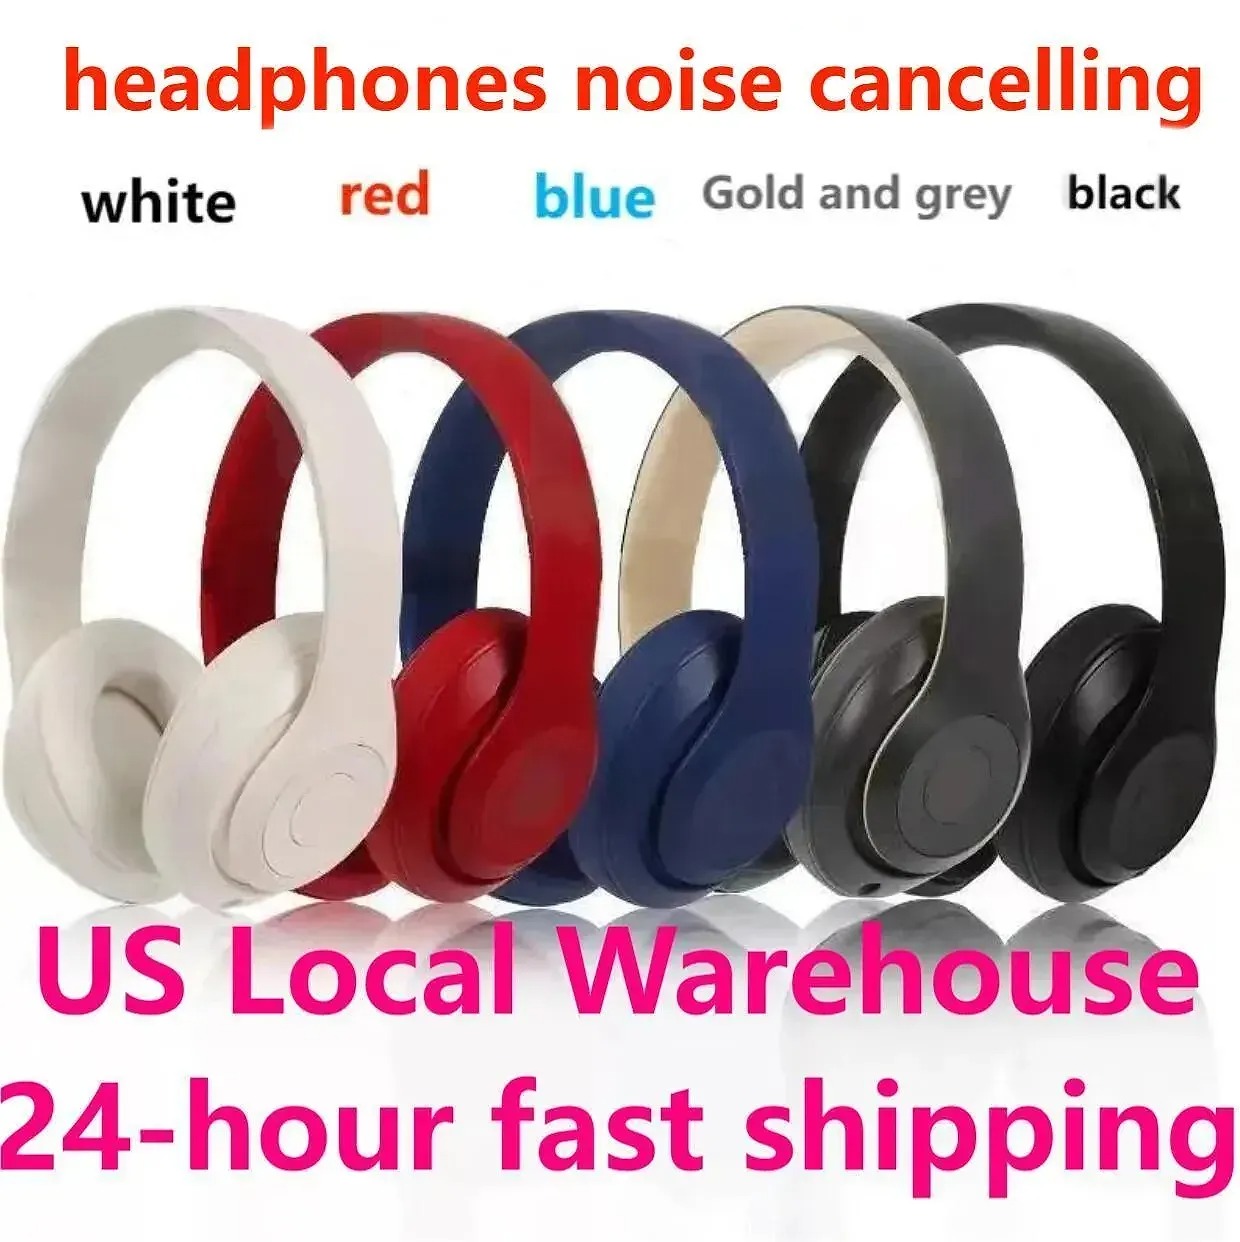 Headsets 3 Wireless Earphones Bluetooth Noise Cancelling Beat Headphone Sports Headset Head Wireless Mic Headset 11 for PC phone computer